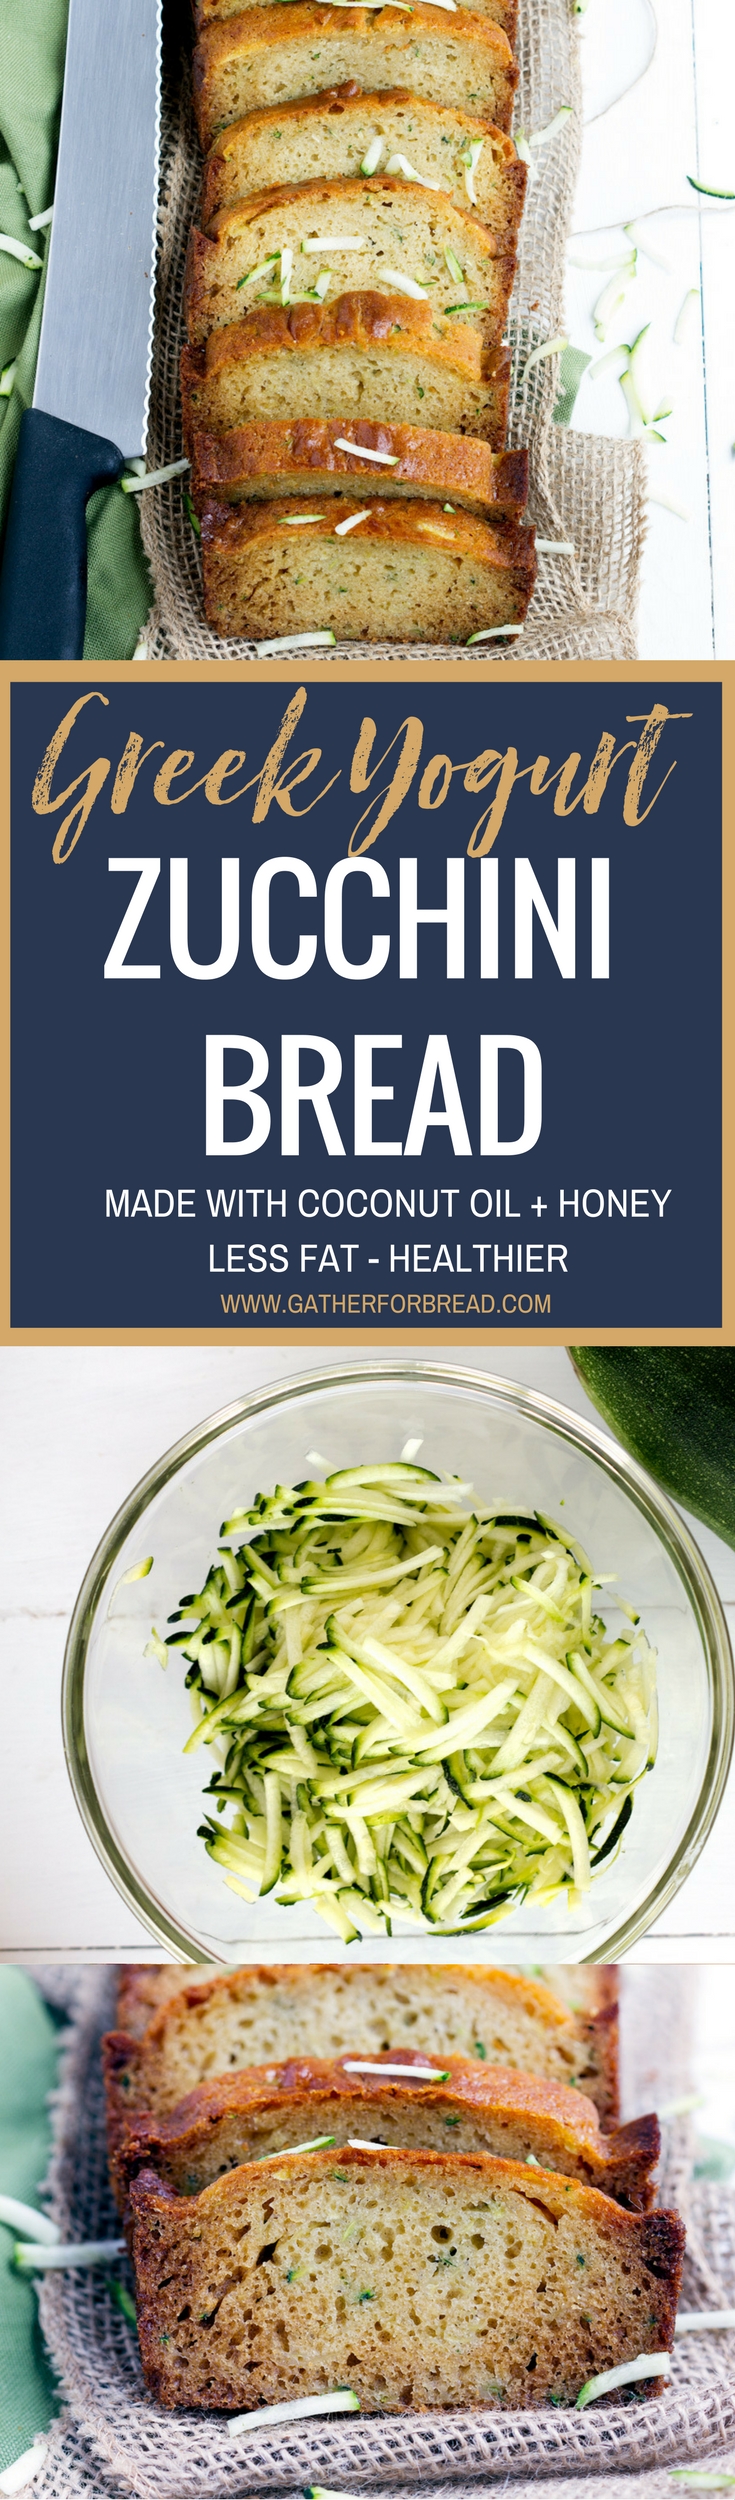 Greek Yogurt Zucchini Bread - Traditional homemade zucchini bread made healthy with Greek Yogurt, coconut oil and honey. Less fat yet still makes a moist delicious loaf that's easy to make.